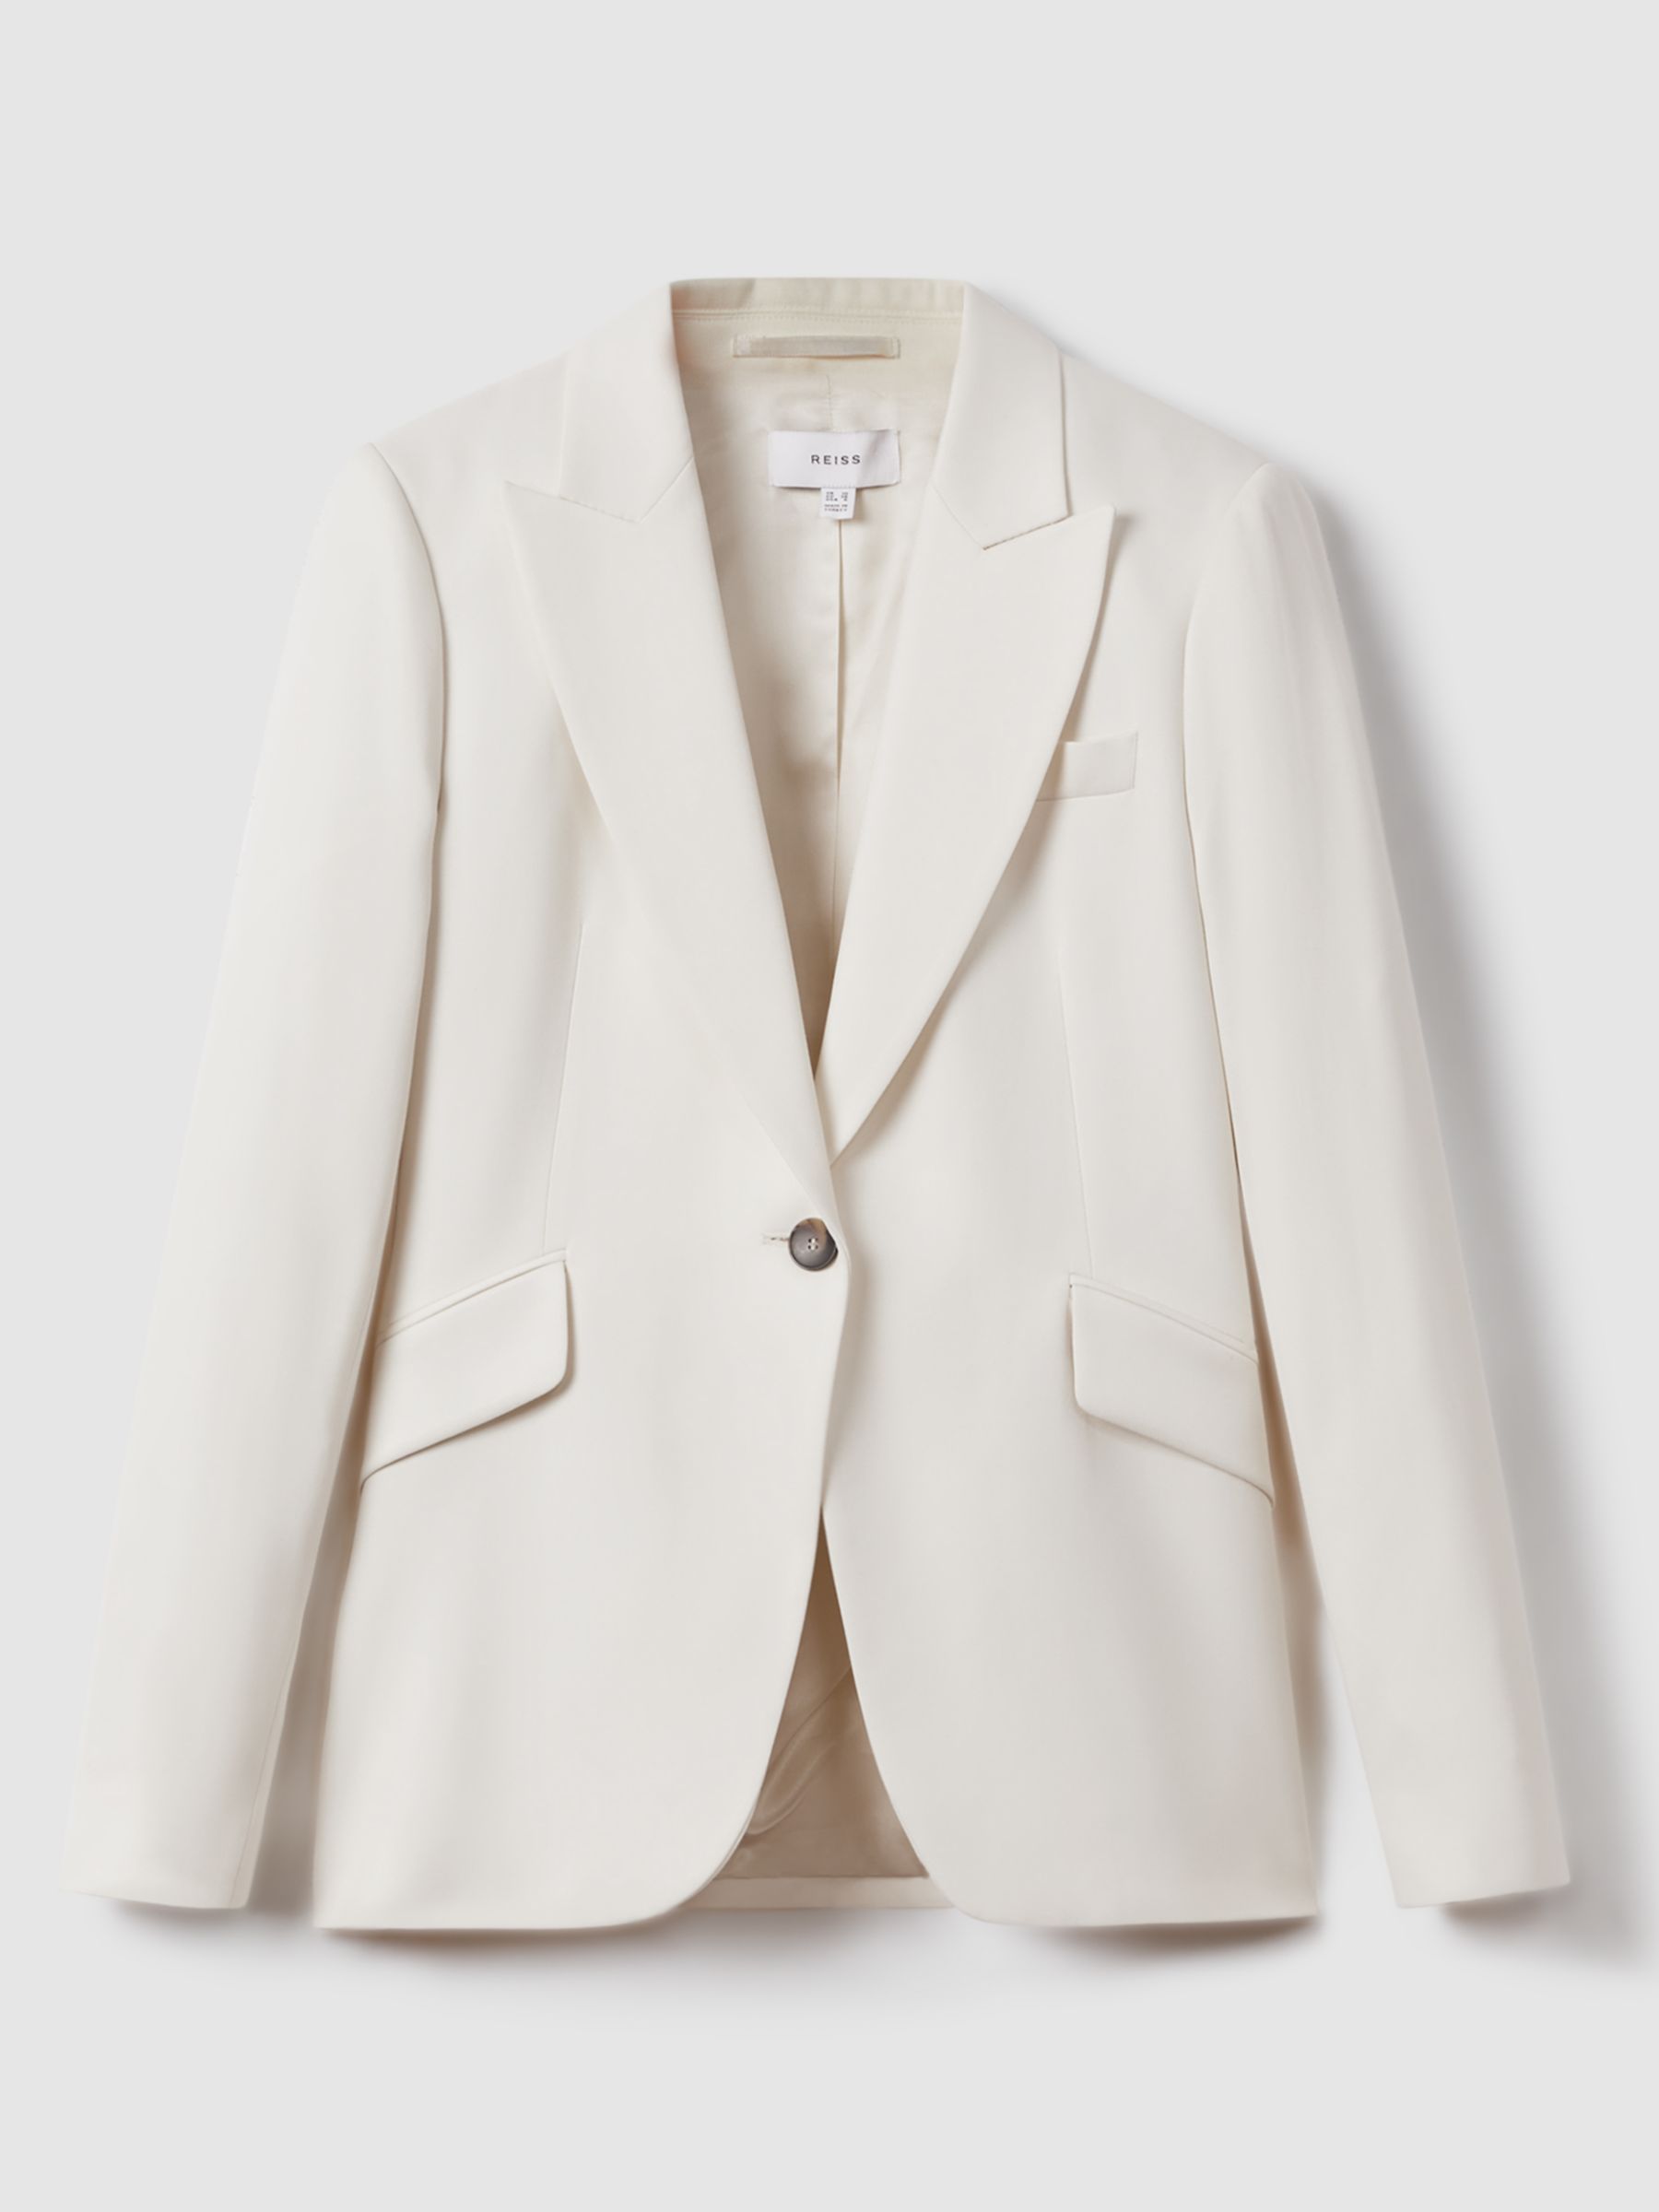 Buy Reiss Millie Tailored Single Breasted Suit Blazer Online at johnlewis.com